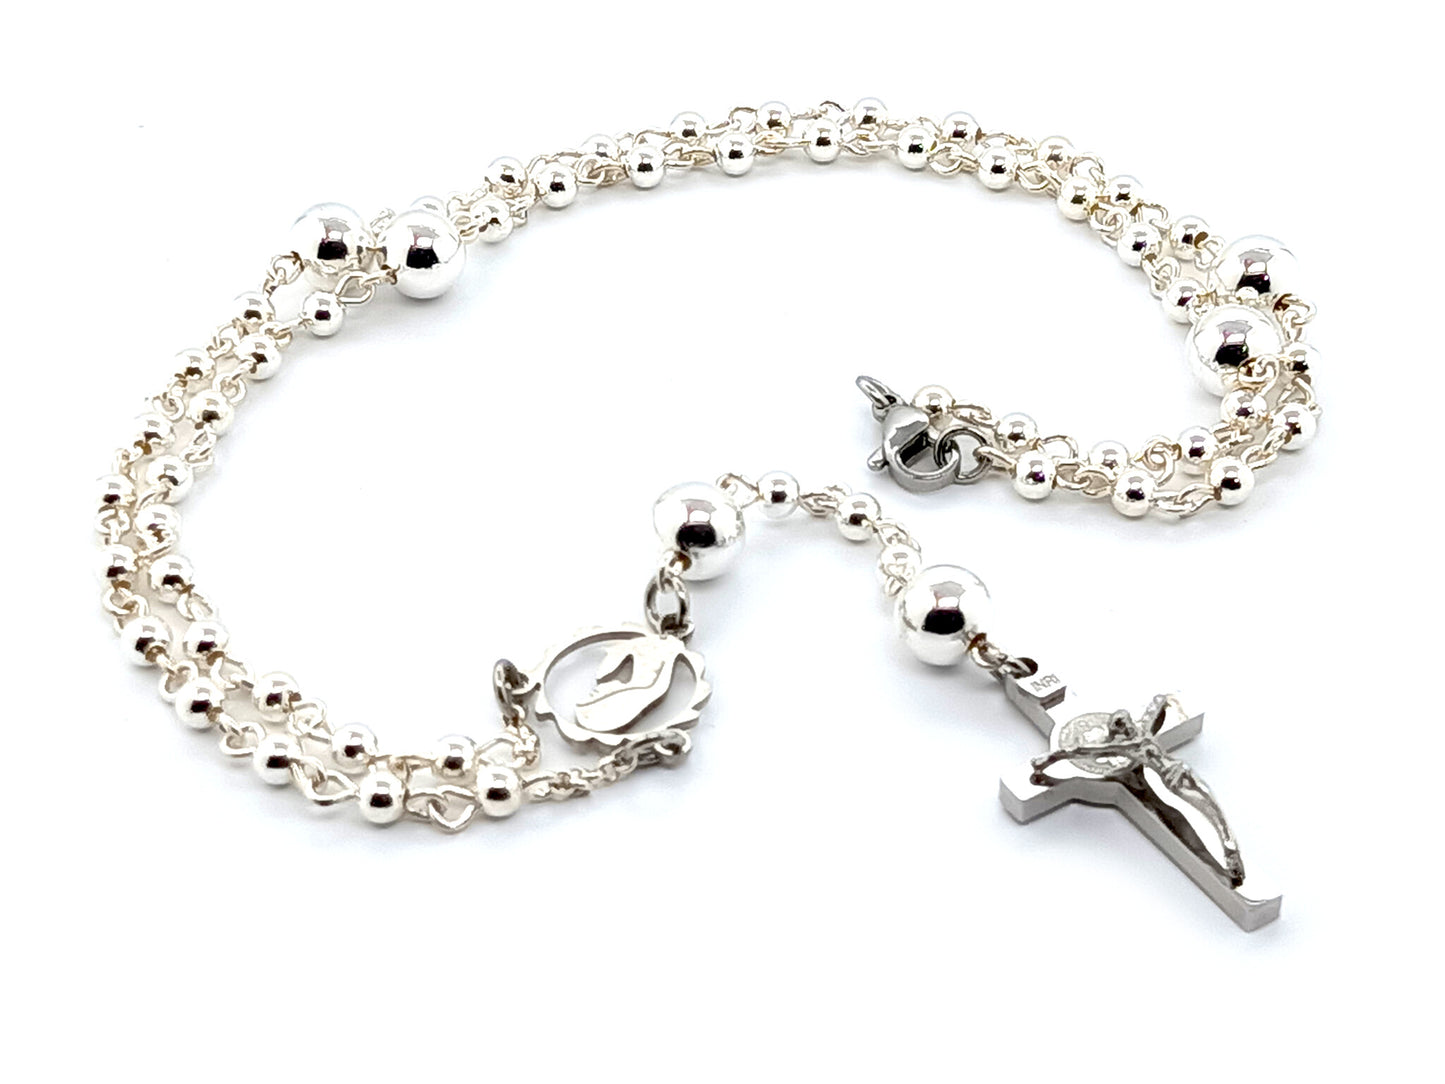 Sterling 925 silver Virgin Mary unique rosary beads necklace with stainless steel Saint Benedict crucifix.